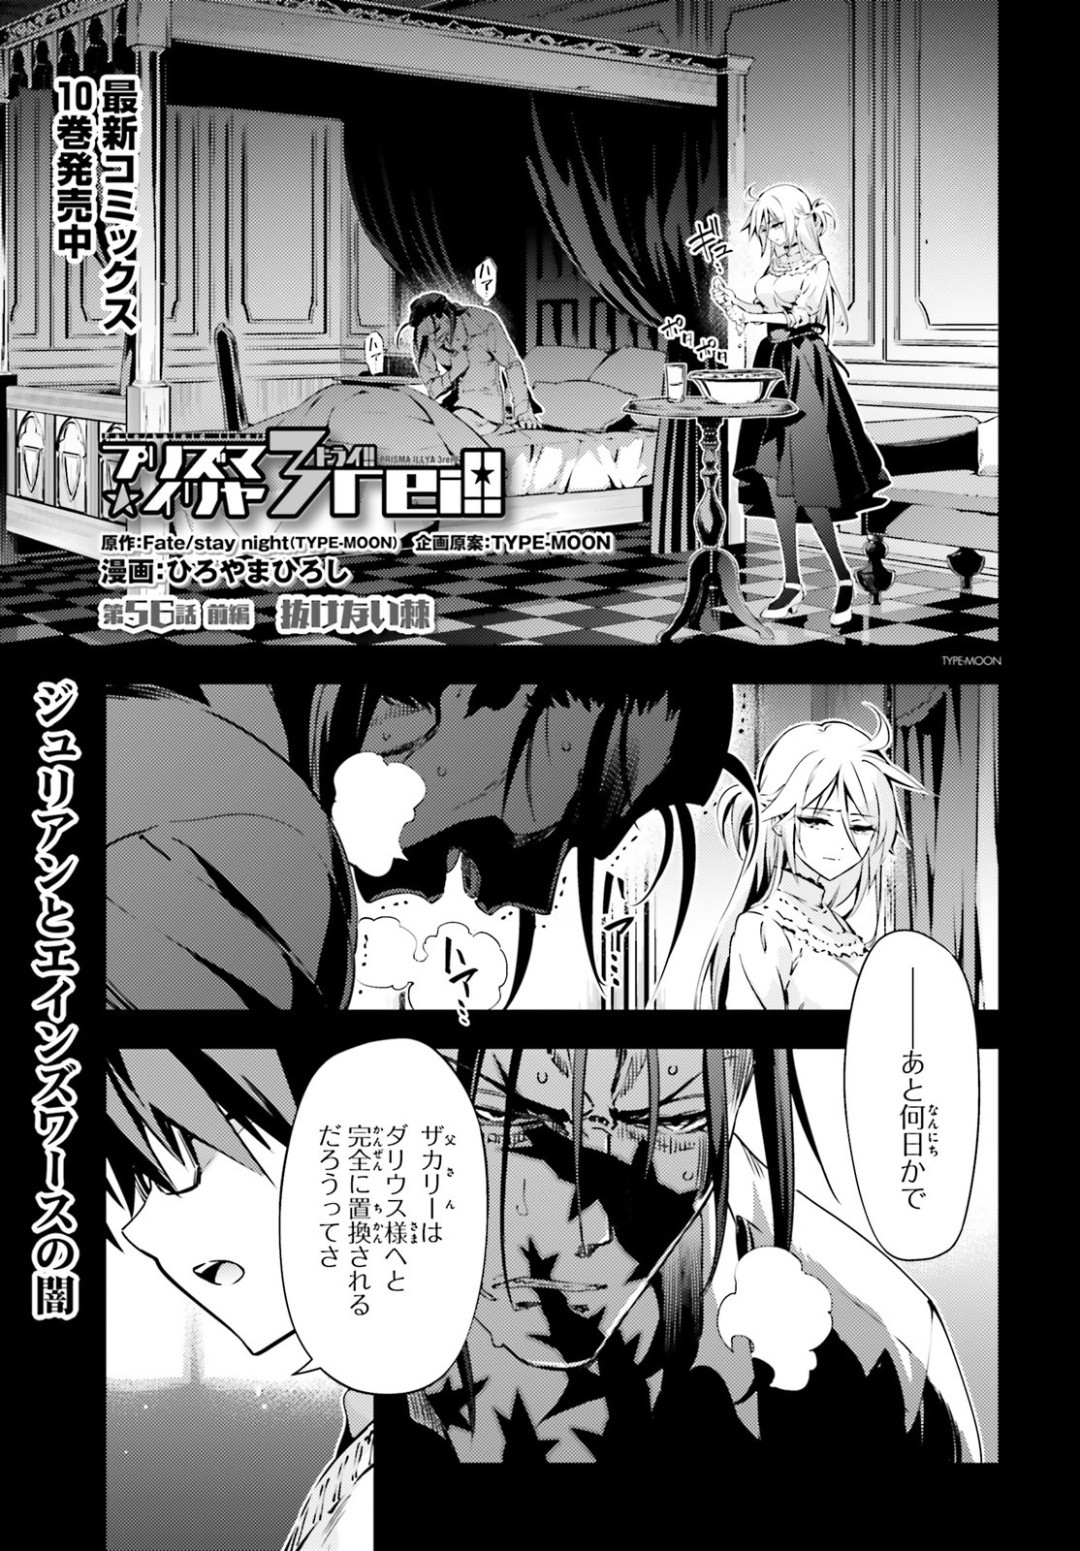 Fate/Kaleid Liner Prisma Illya Drei! - Chapter 56-1 - Page 1